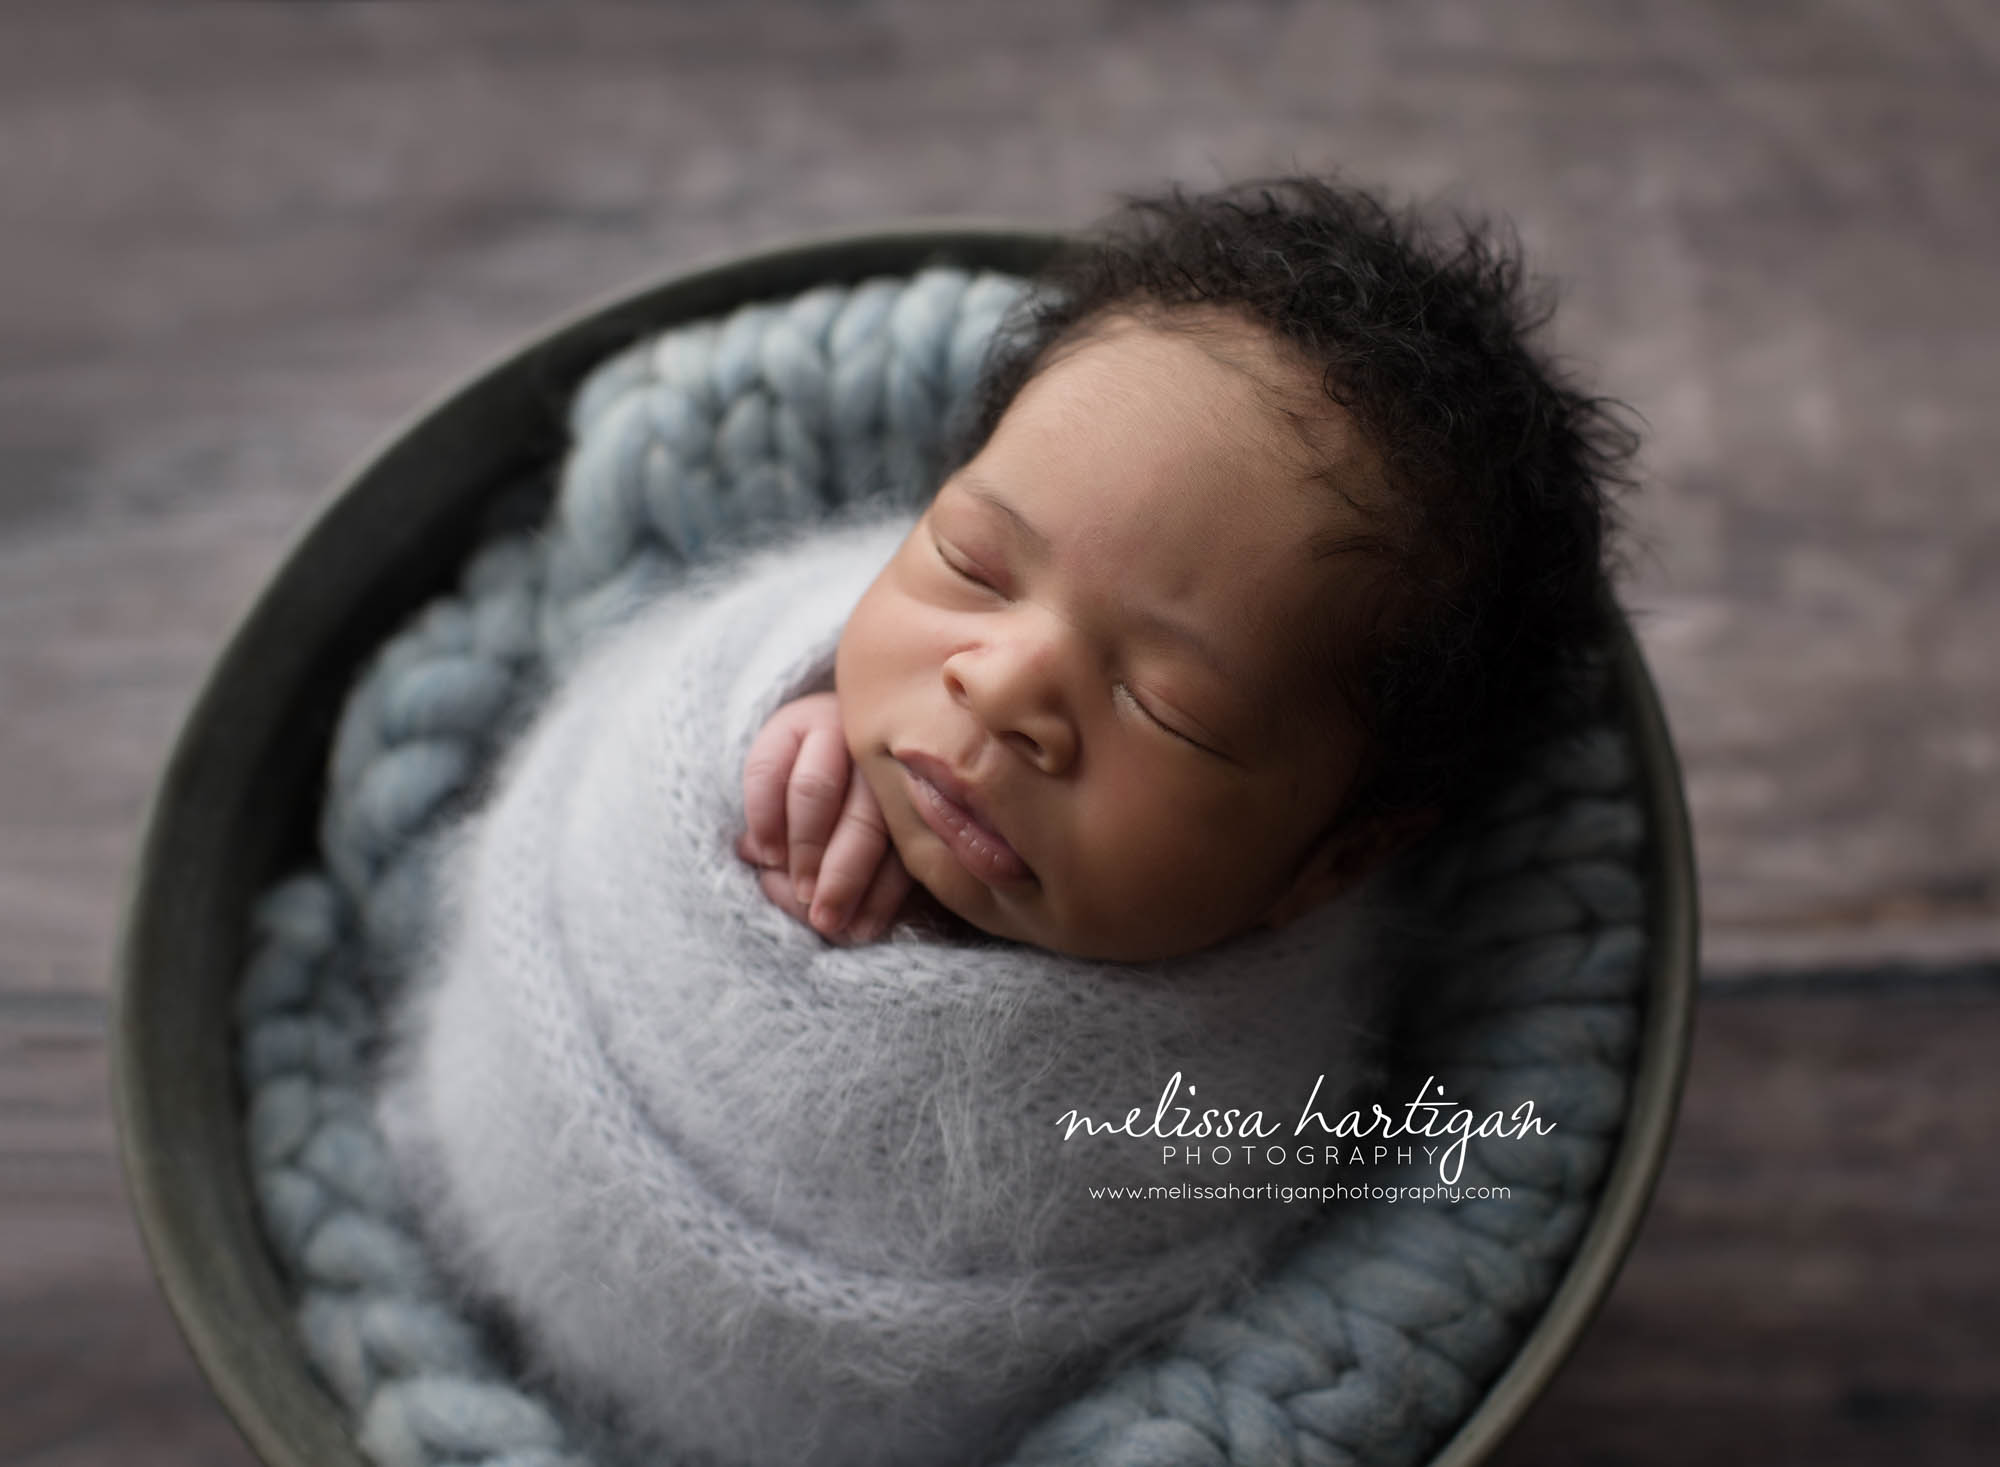 Melissa Hartigan Photography Connecticut Maternity and Newborn CT Photographer Coventry Ct Middlefield CT baby Fairfield county Newborn pose baby boy in metal bucket with blue knit blanket wrapped in blue with hands sticking out sleeping